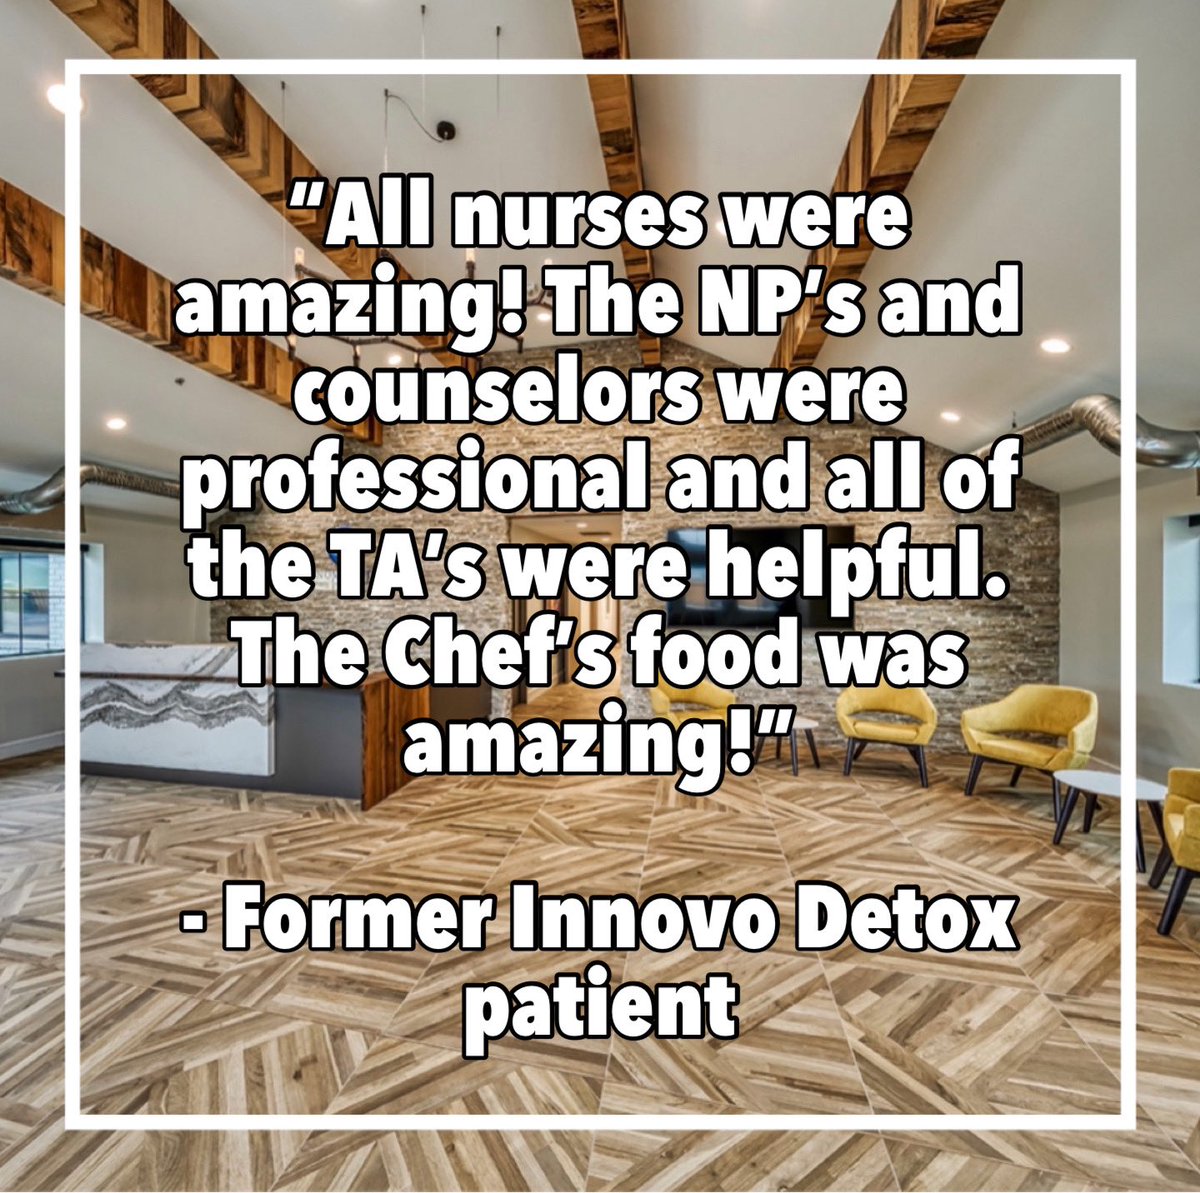 A #testimonial we received from a recent Innovo Detox patient about their experience at our facility and with our staff #quote #quotes #quotesdaily #addiction #detox #recovery #mentalhealth #sober #sobriety #addictiontreatment #addictionrecovery #hope #healing #patientcare #rehab